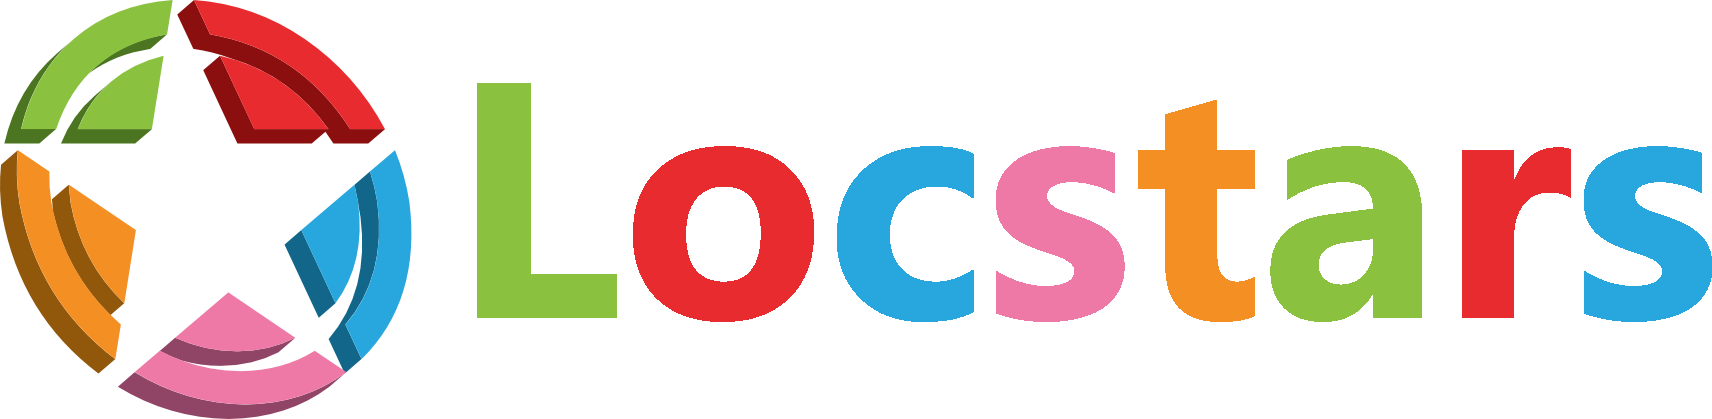 Locstars - Locstars - Localization And Certified Translation Services (1712x419)